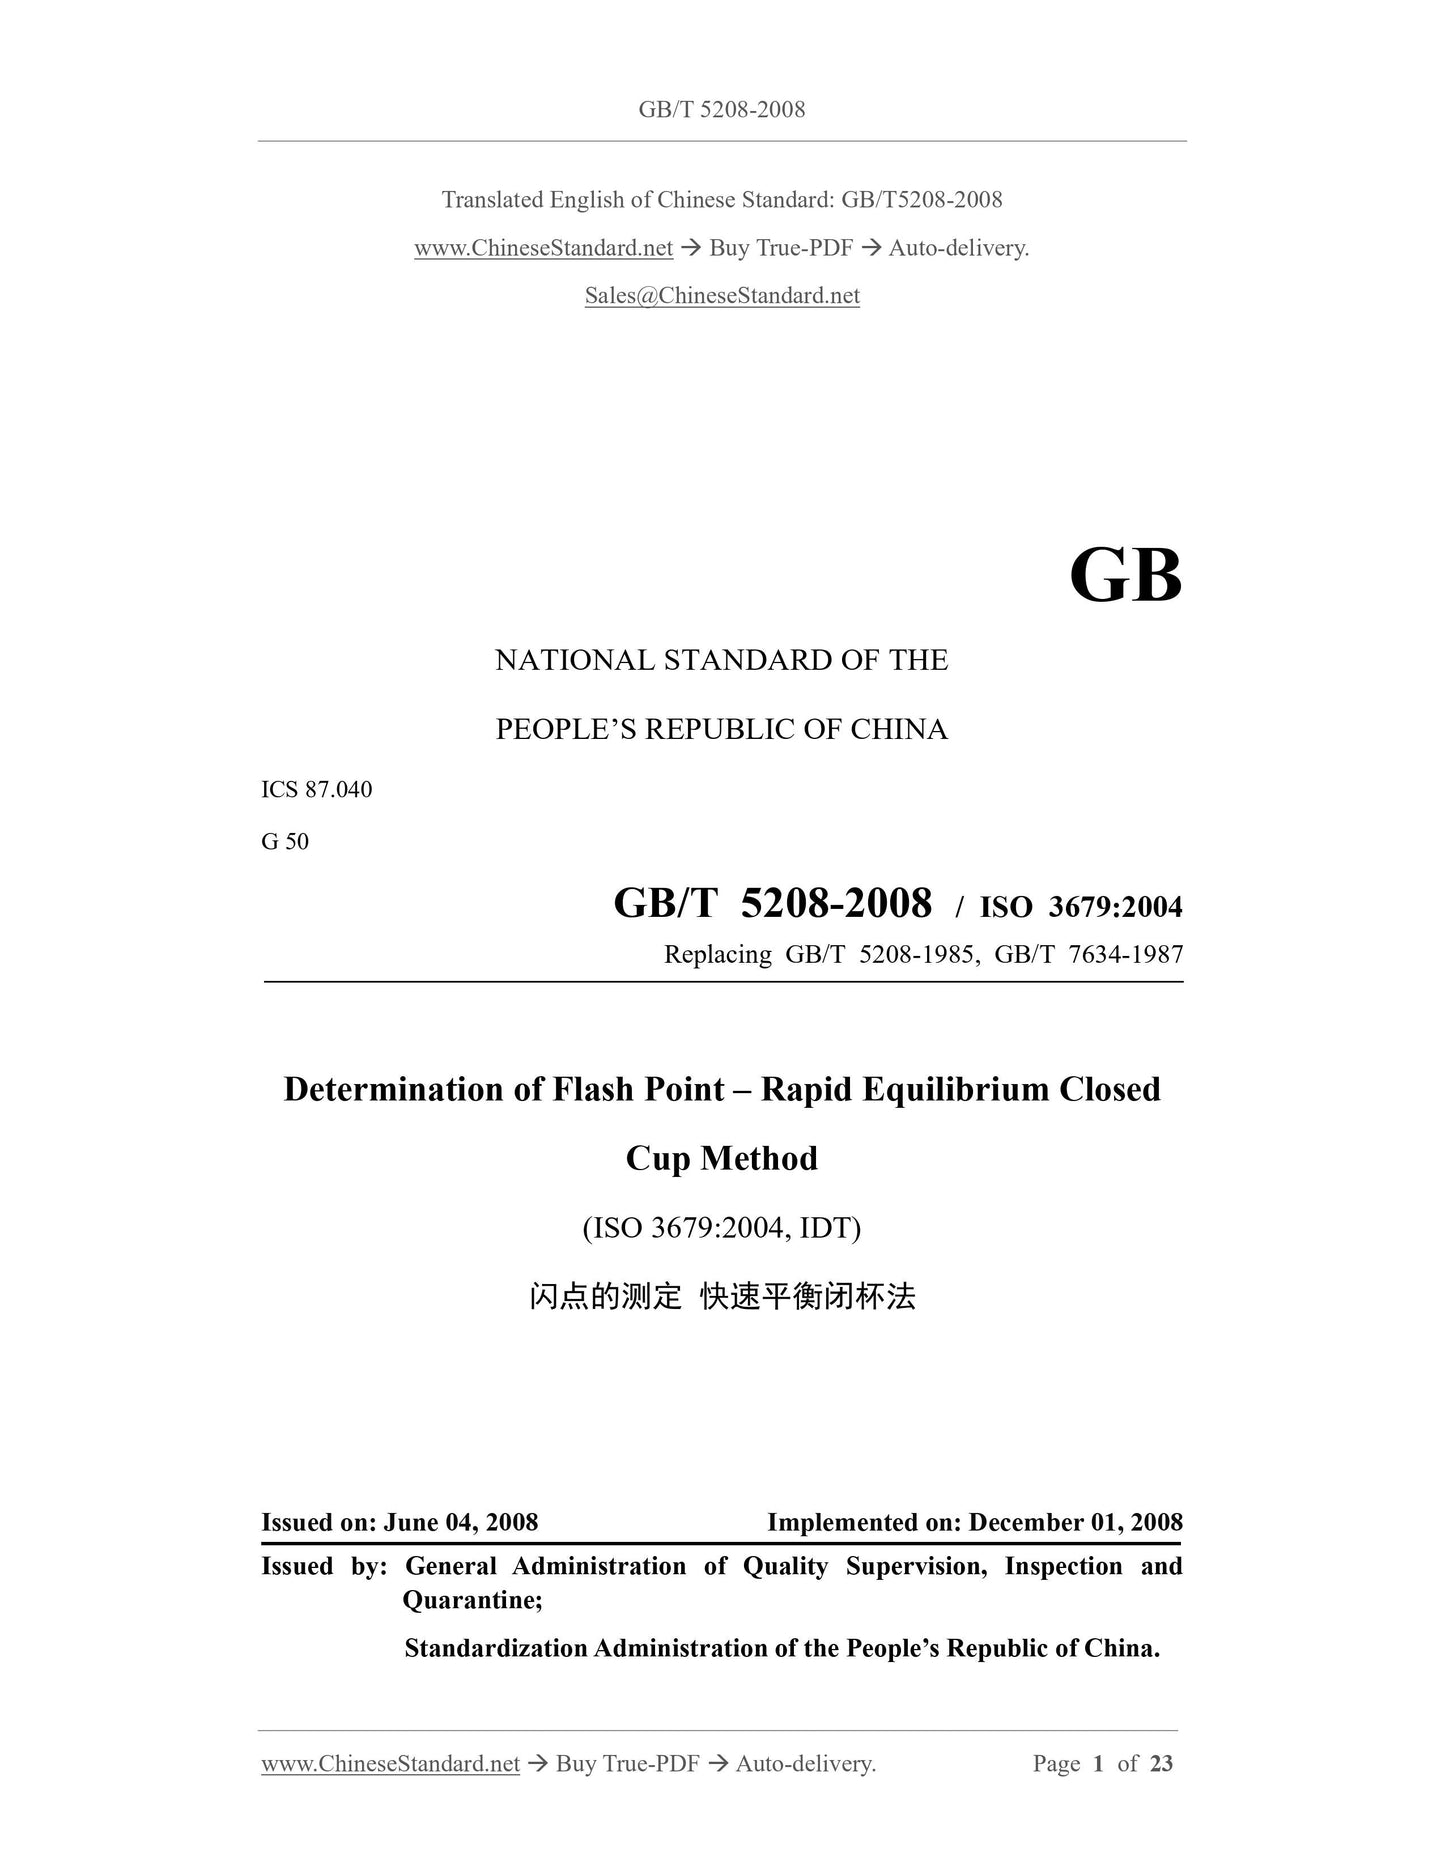 GB/T 5208-2008 Page 1